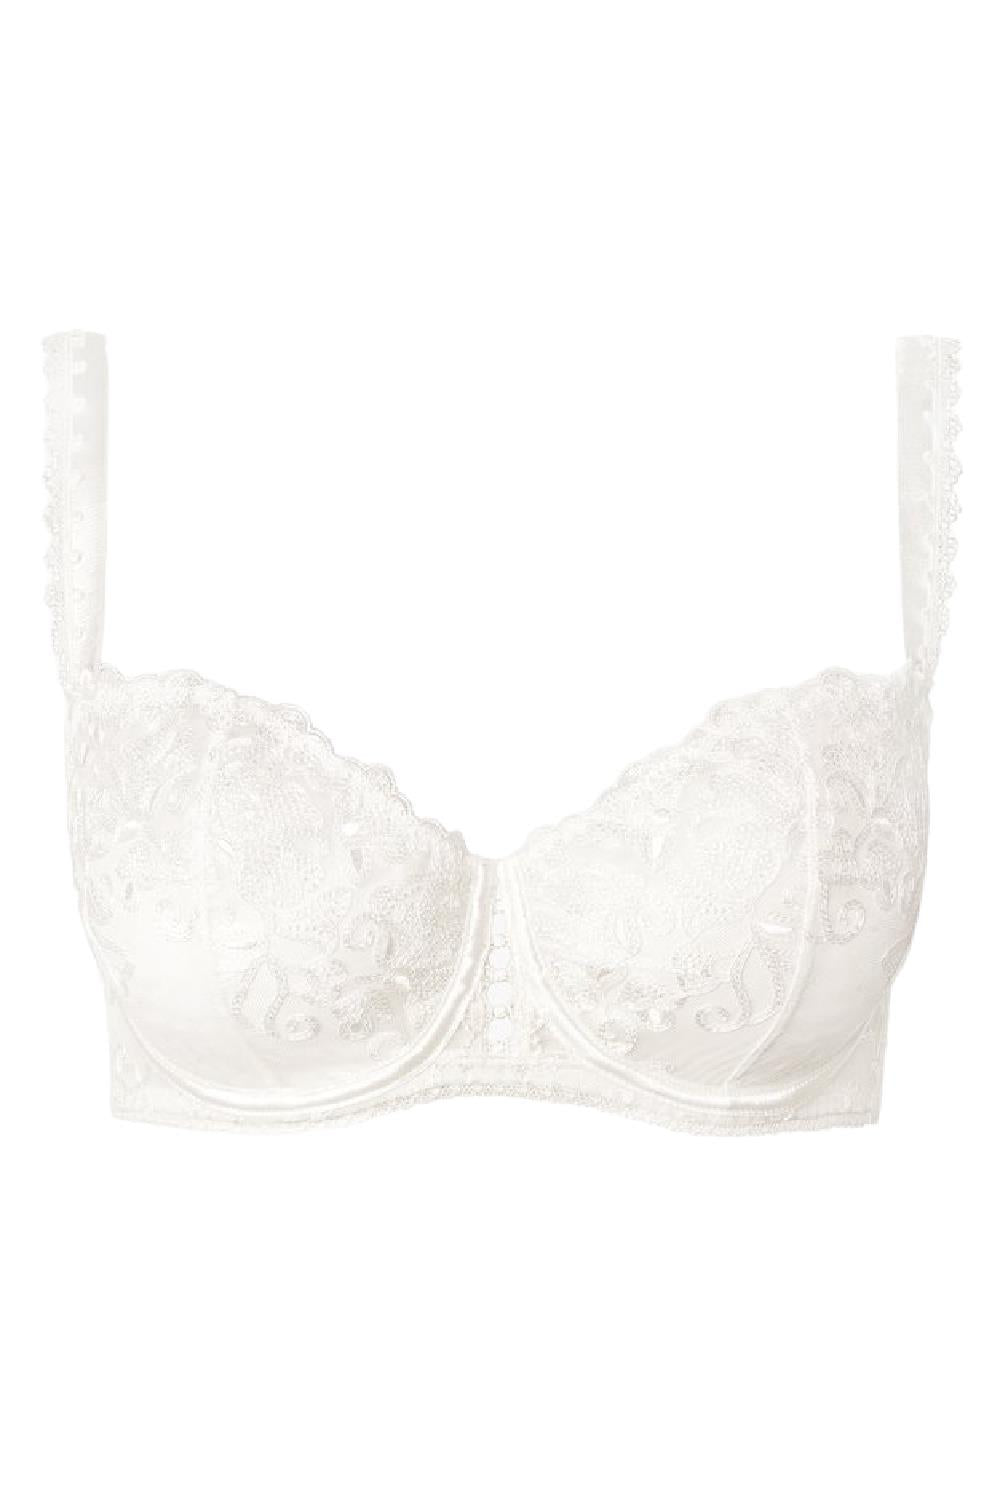 Pour Toujours Push Up Half Cup Bra TC1-402 – My Top Drawer